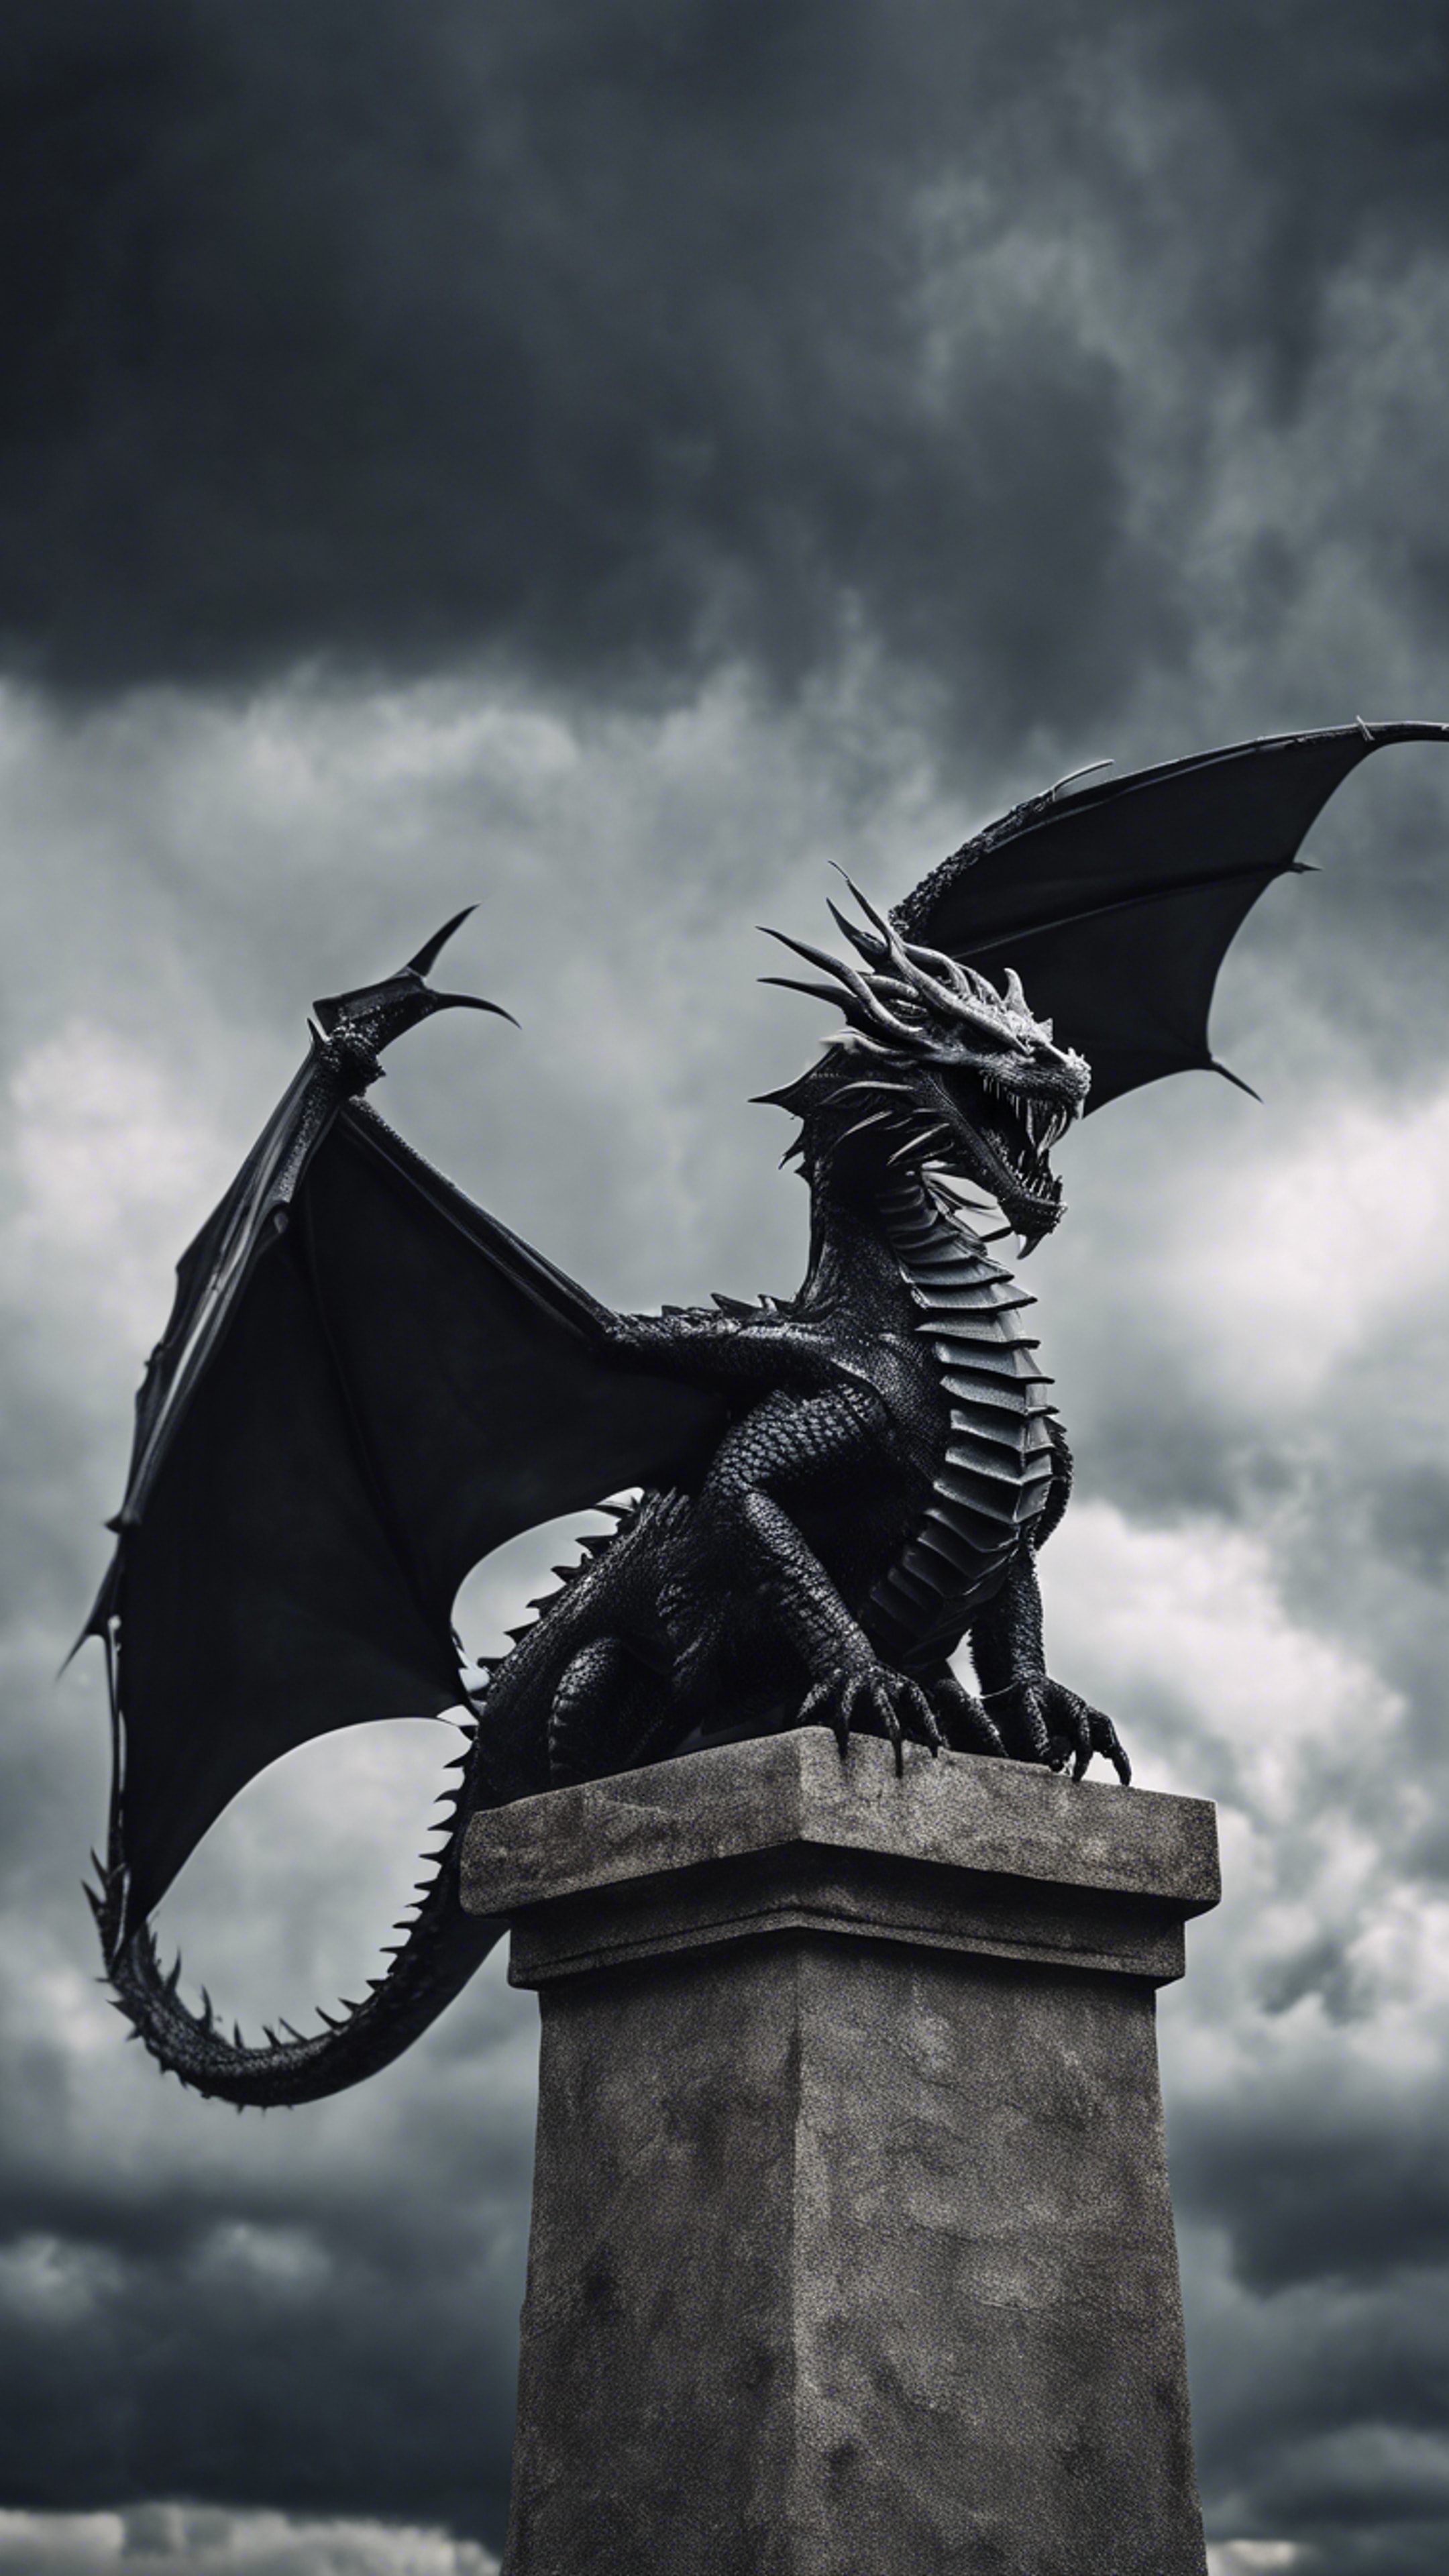 A gothic-style, black iron dragon flying amidst stormy, dark clouds. Wallpaper[aebeaee8cf654a26baba]